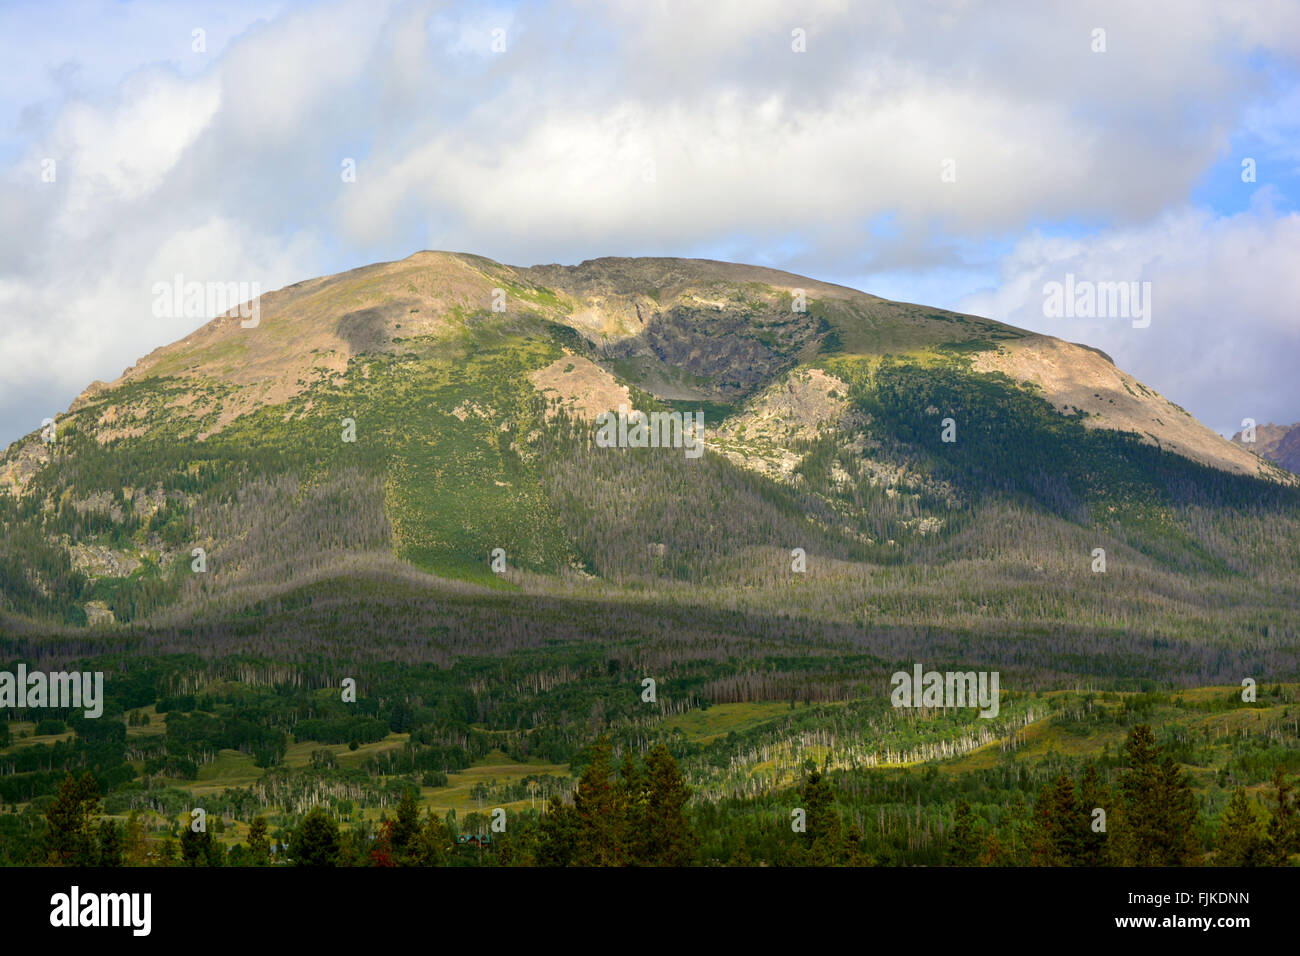 Rounded Tree Covered Mountain Top Stock Photo